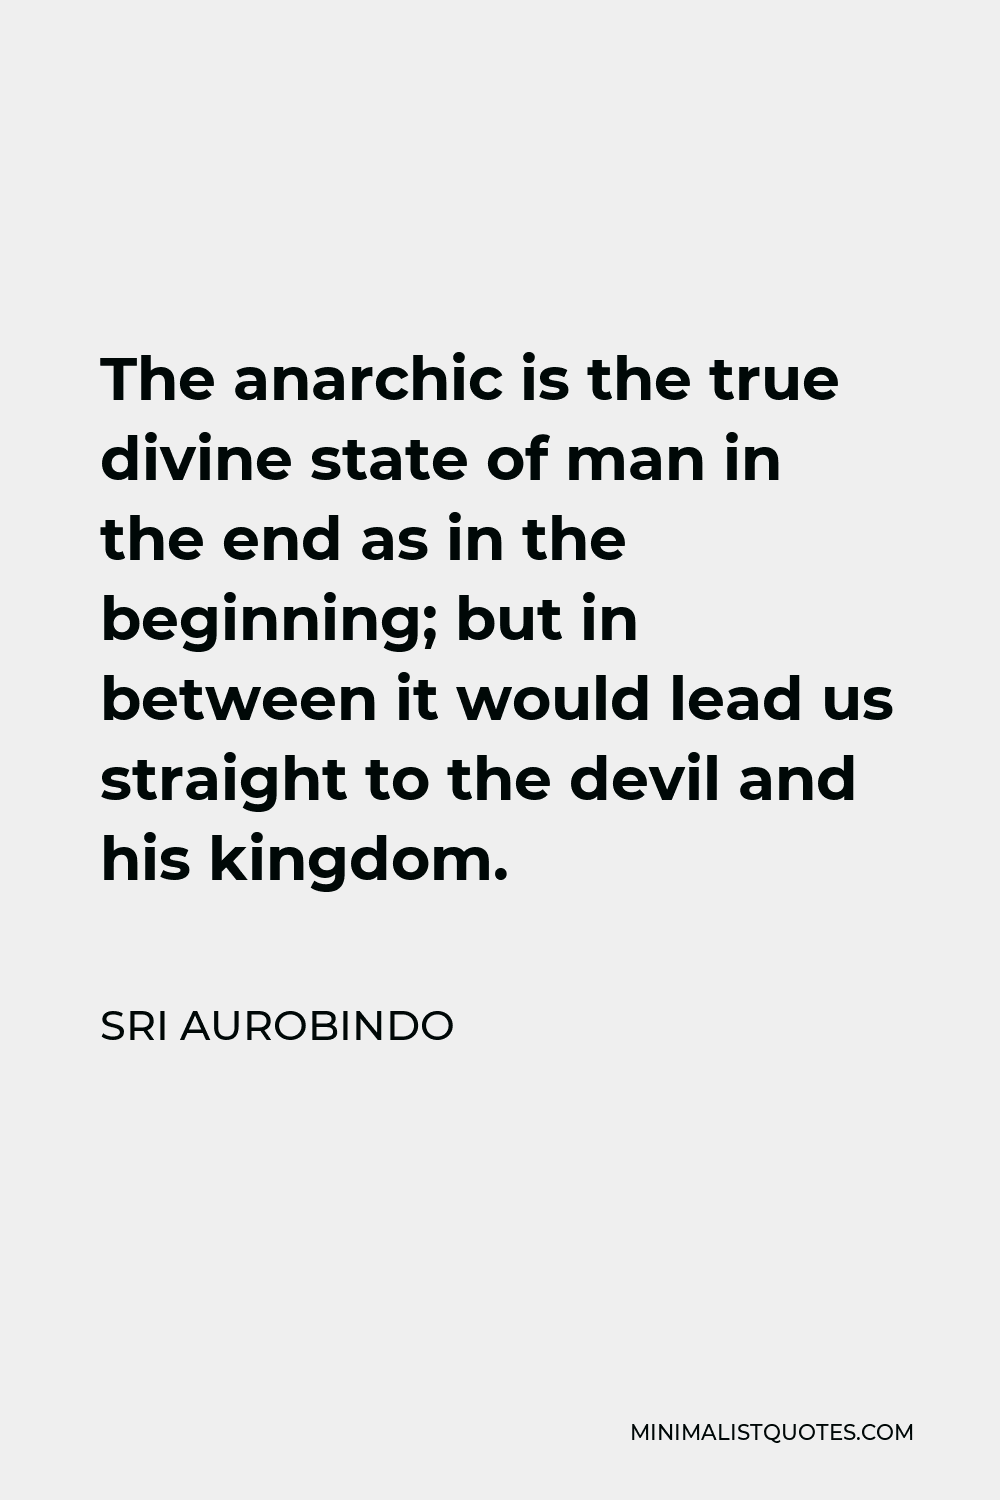 Sri Aurobindo Quote - The anarchic is the true divine state of man in the end as in the beginning; but in between it would lead us straight to the devil and his kingdom.